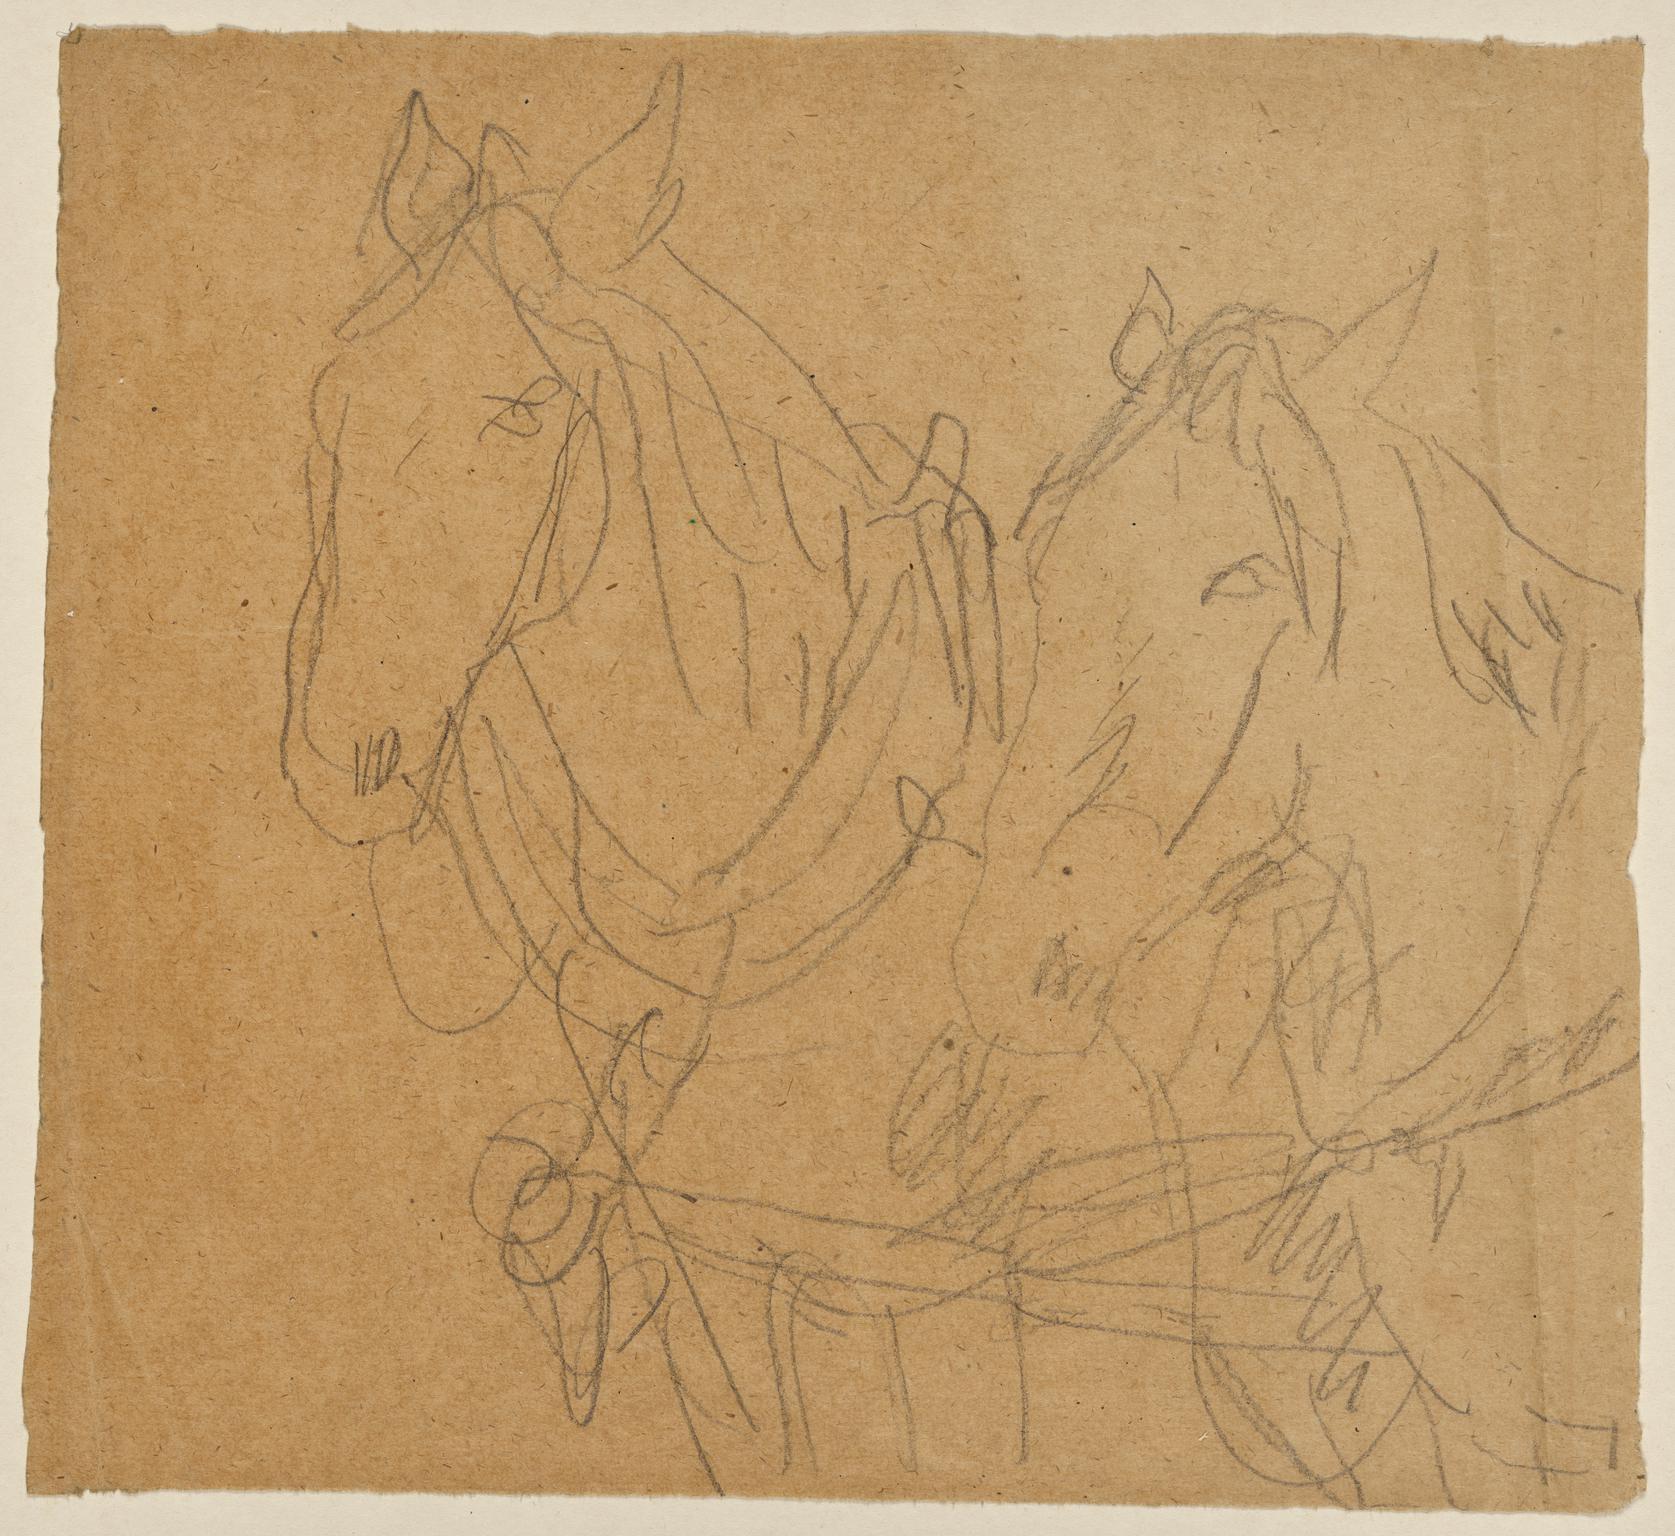 Horses in harness